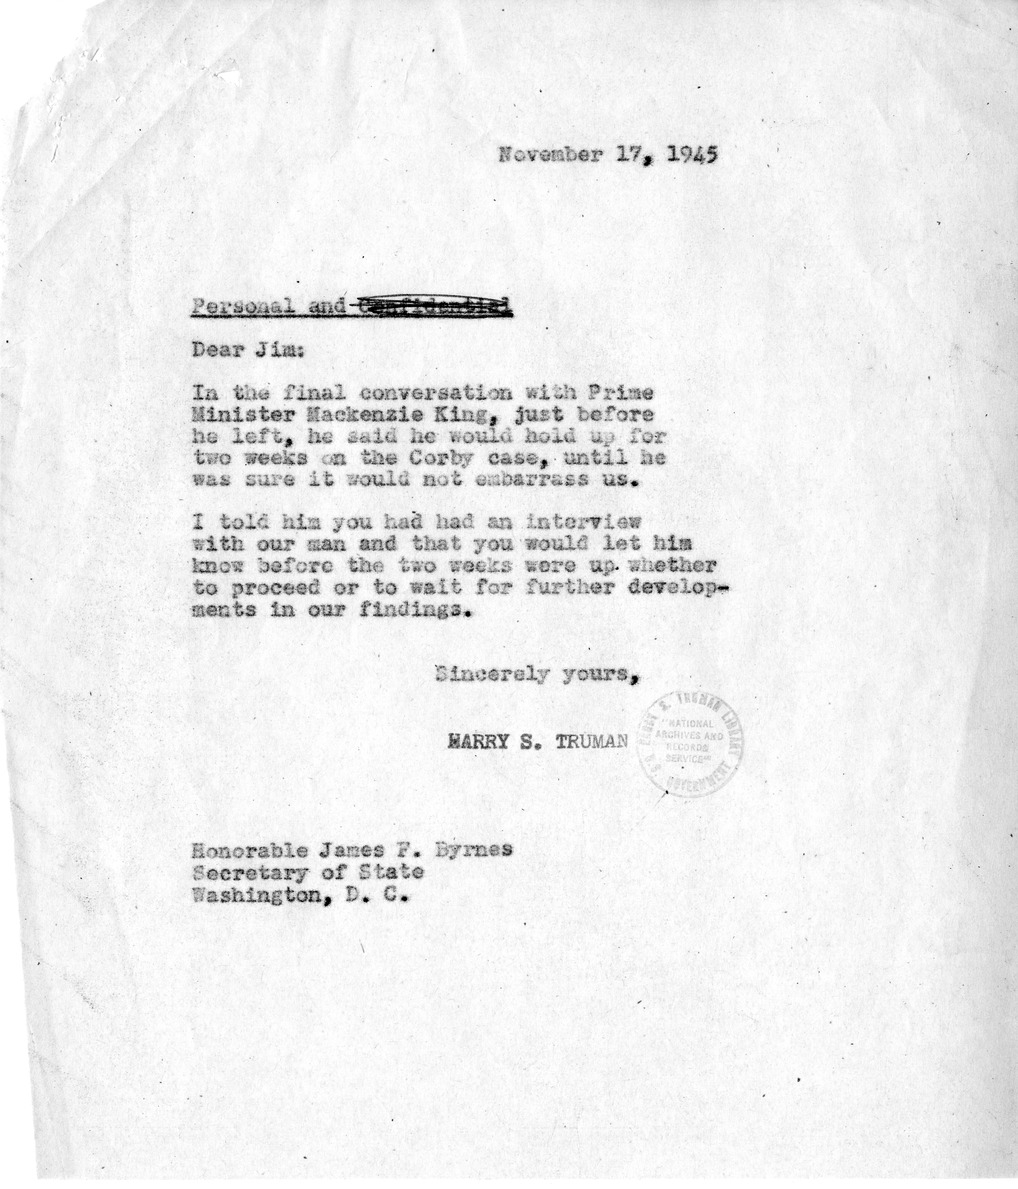 Letter from President Harry S. Truman to Secretary of State James Byrnes with Related Material